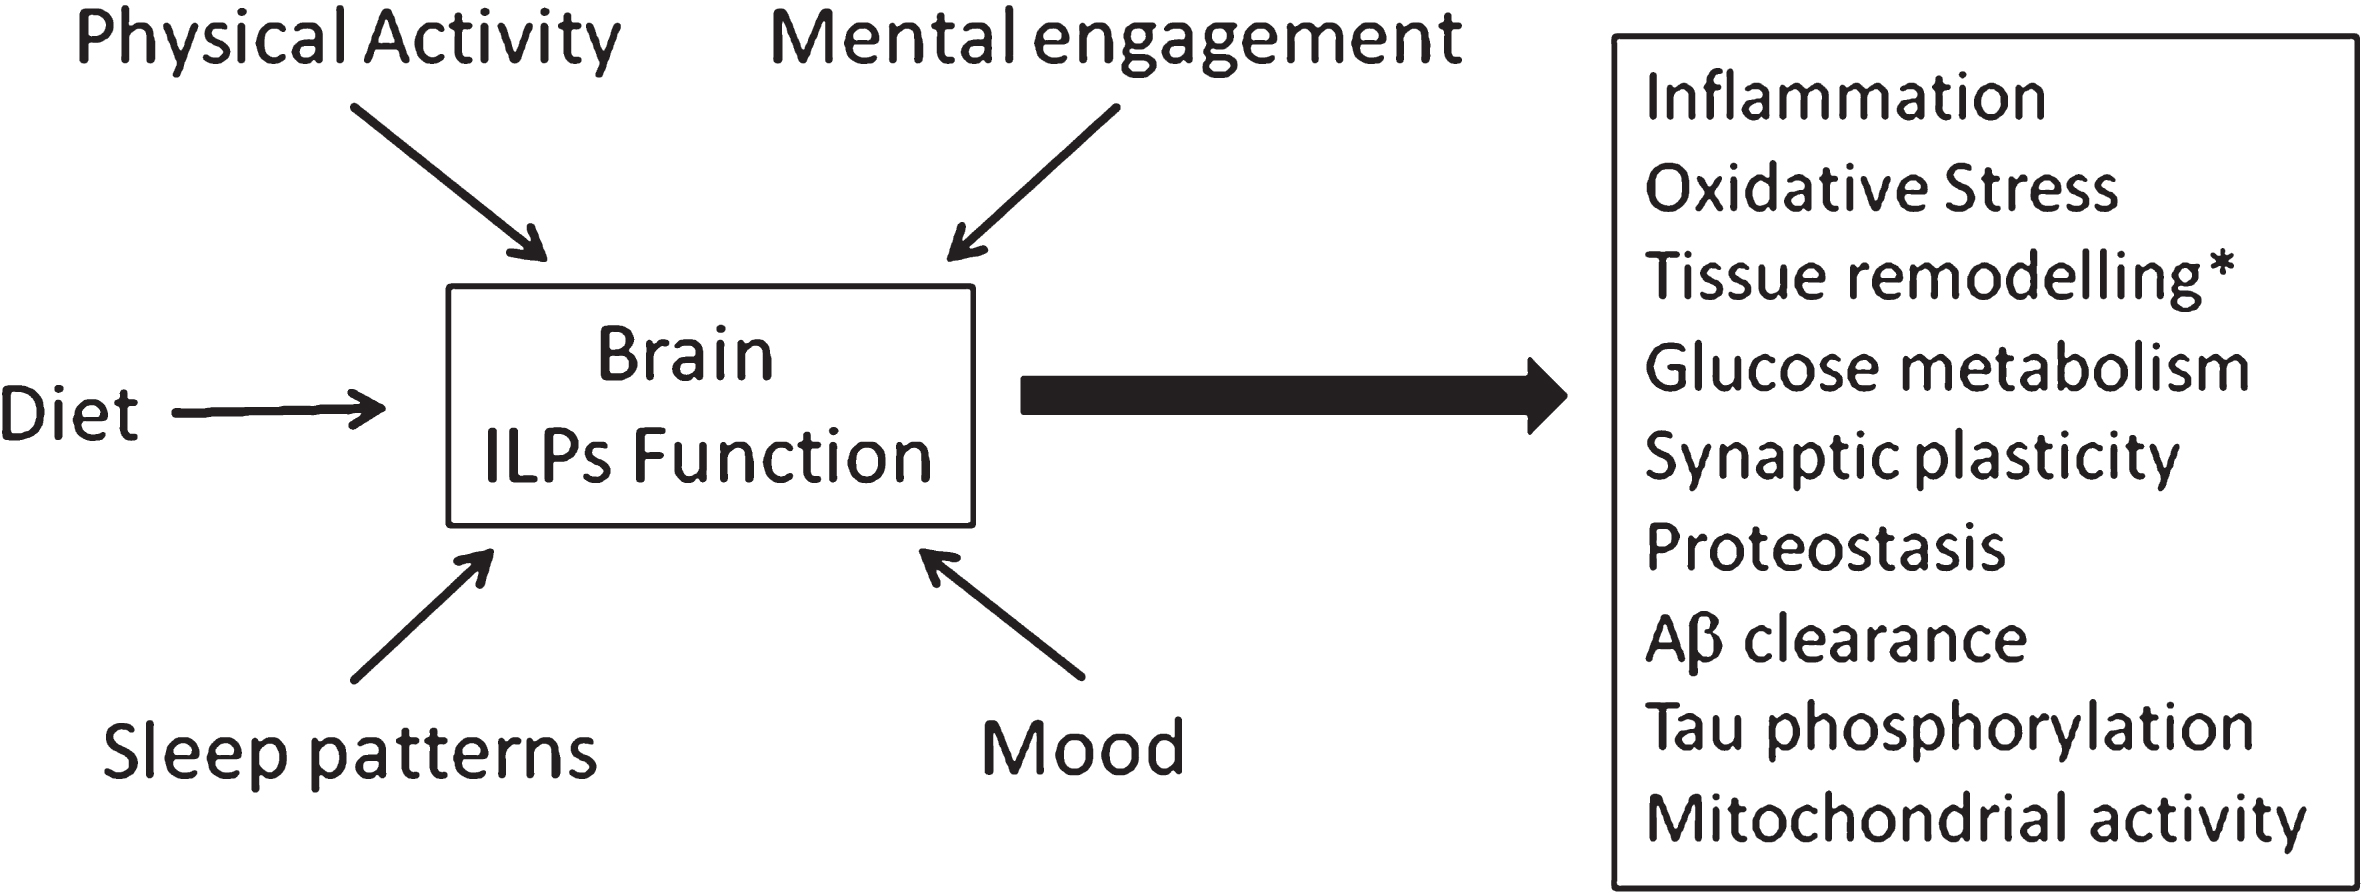 Altered ILP function mediates the impact of life-style factors on pathological changes associated to Alzheimer’s disease. Diet, mental and physical activity, sleep quality and mood can modulate ILP function that in turn intervene in many processes known to be altered in AD. Main ones include homeosteatic inflammation, protection against reactive oxygen species, tissue remodelling (including formation of new vessels, neurons and glia), glucose handling by brain cells, synaptic plasticity – that in turn impacts on mood, cognition, and sleep architecture, Aβ clearance, tau phosphorylation, proteostasis (autophagy, proteosome activity) and mitochondrial function. *New neuronal formation is an important aspect of ILPs function in the adult brain. However, recent controversial evidence in favor [192] or against [193] the presence of neurogenesis in the adult human brain puts somewhat in hold the significance of this ILP trait in human physiology.